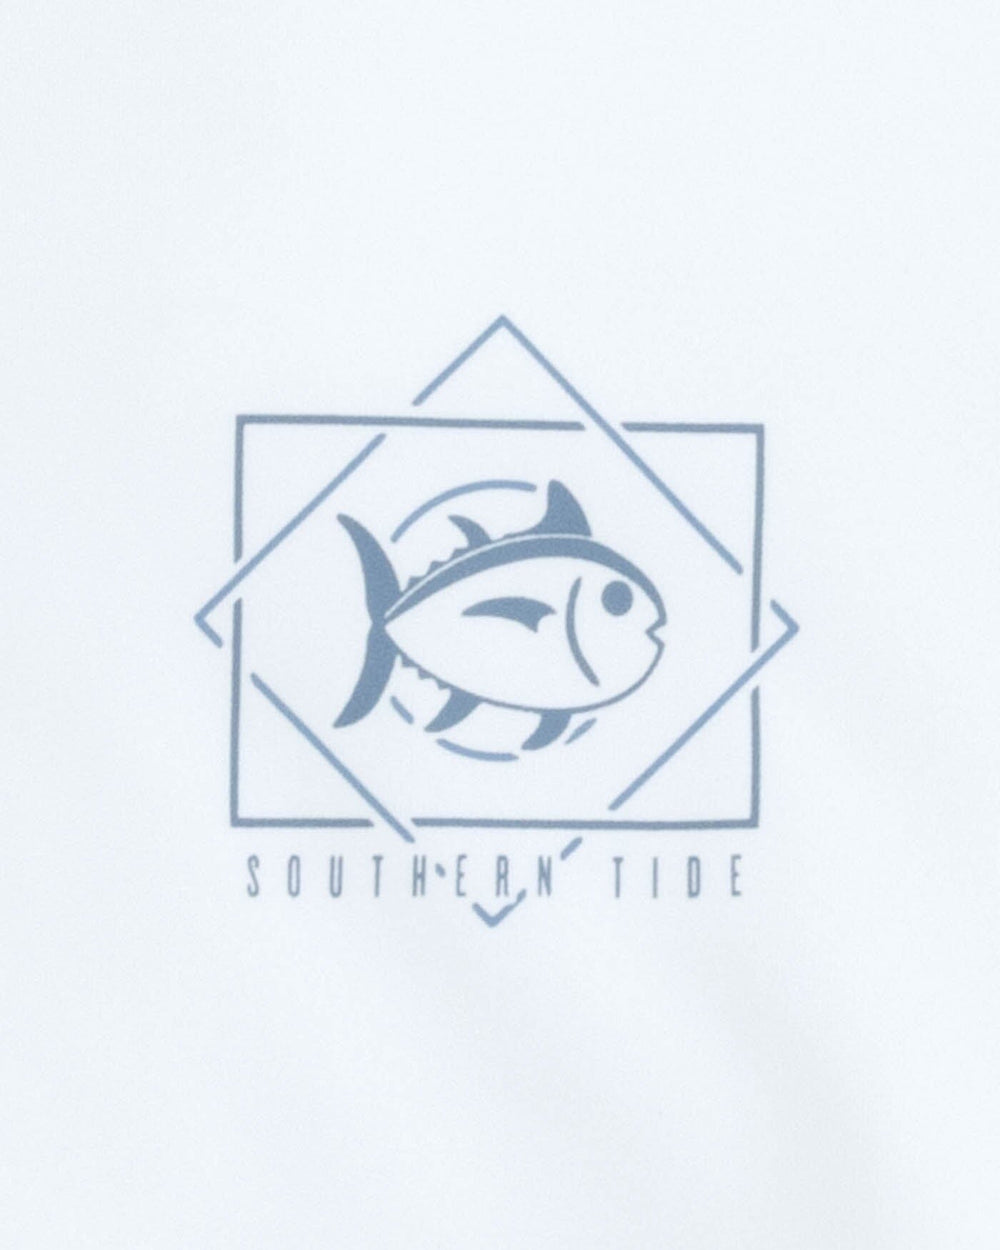 The detail view of the Southern Tide Geometric Striped Long Sleeve Performance T-shirt by Southern Tide - Classic White